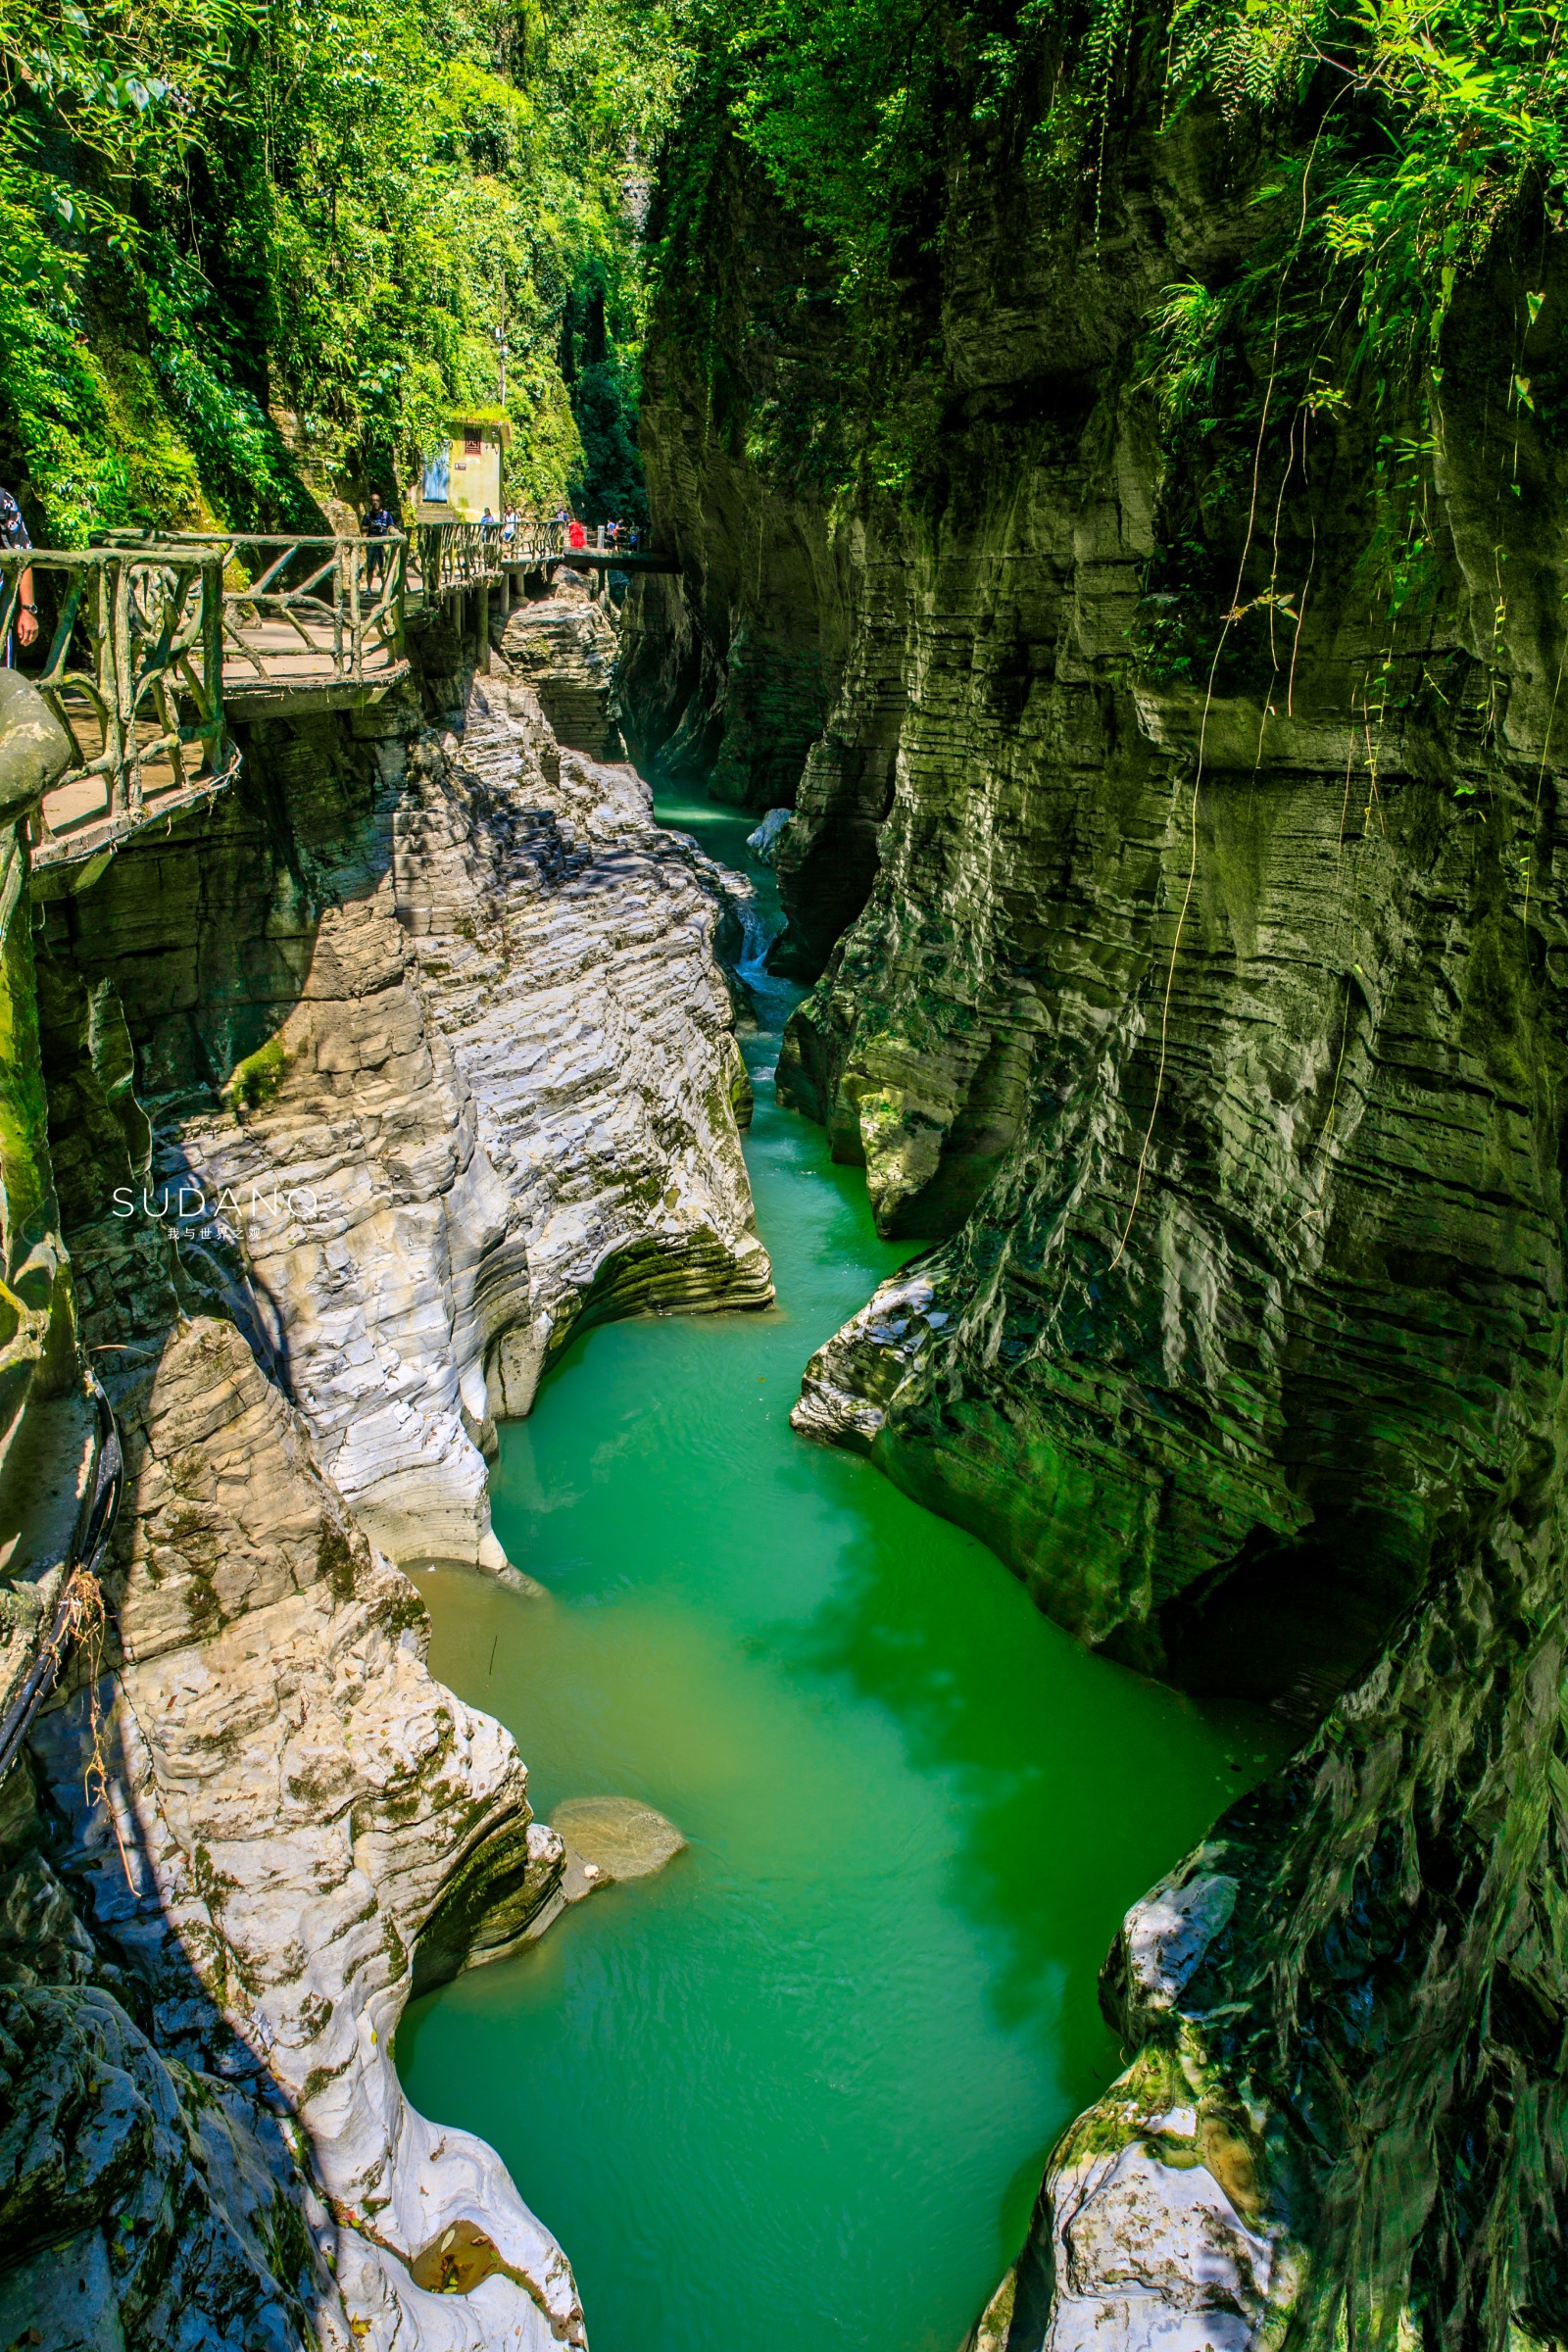 Secret Hubei Tour: Enshi Earth Heart Valley, named "China's Most Beautiful Wonderland" by CNN